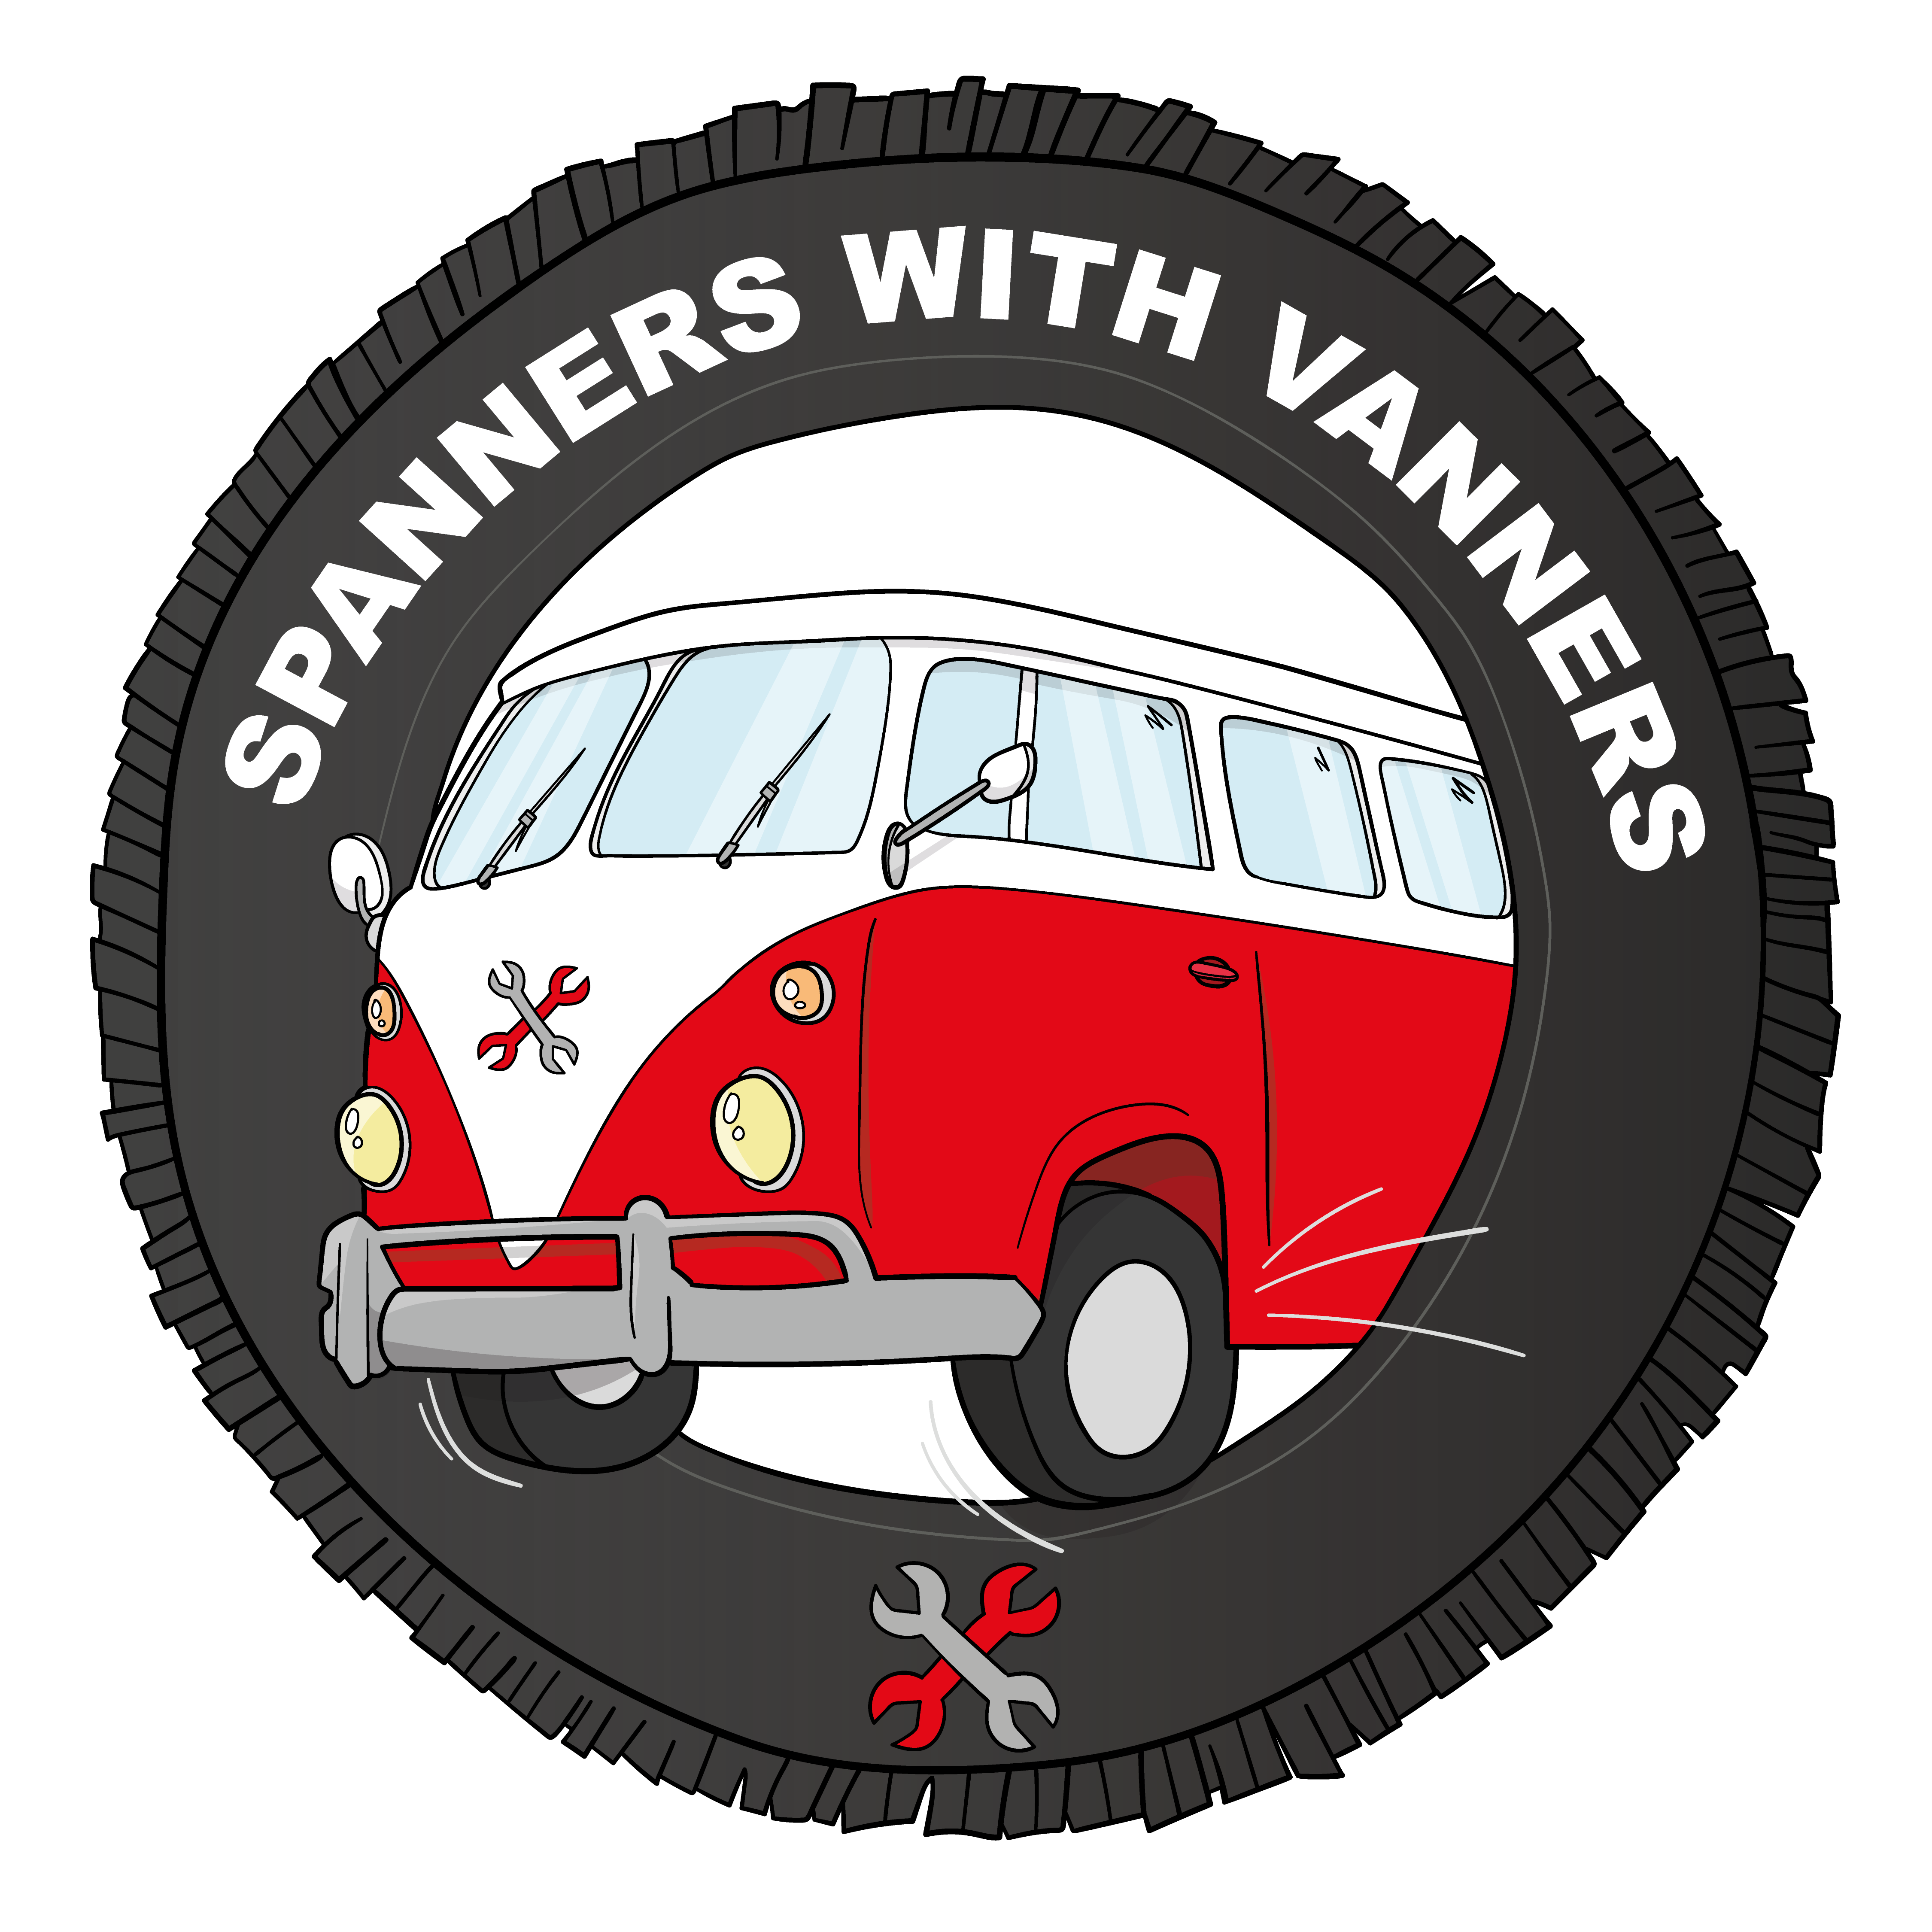 Spanners with Vanners